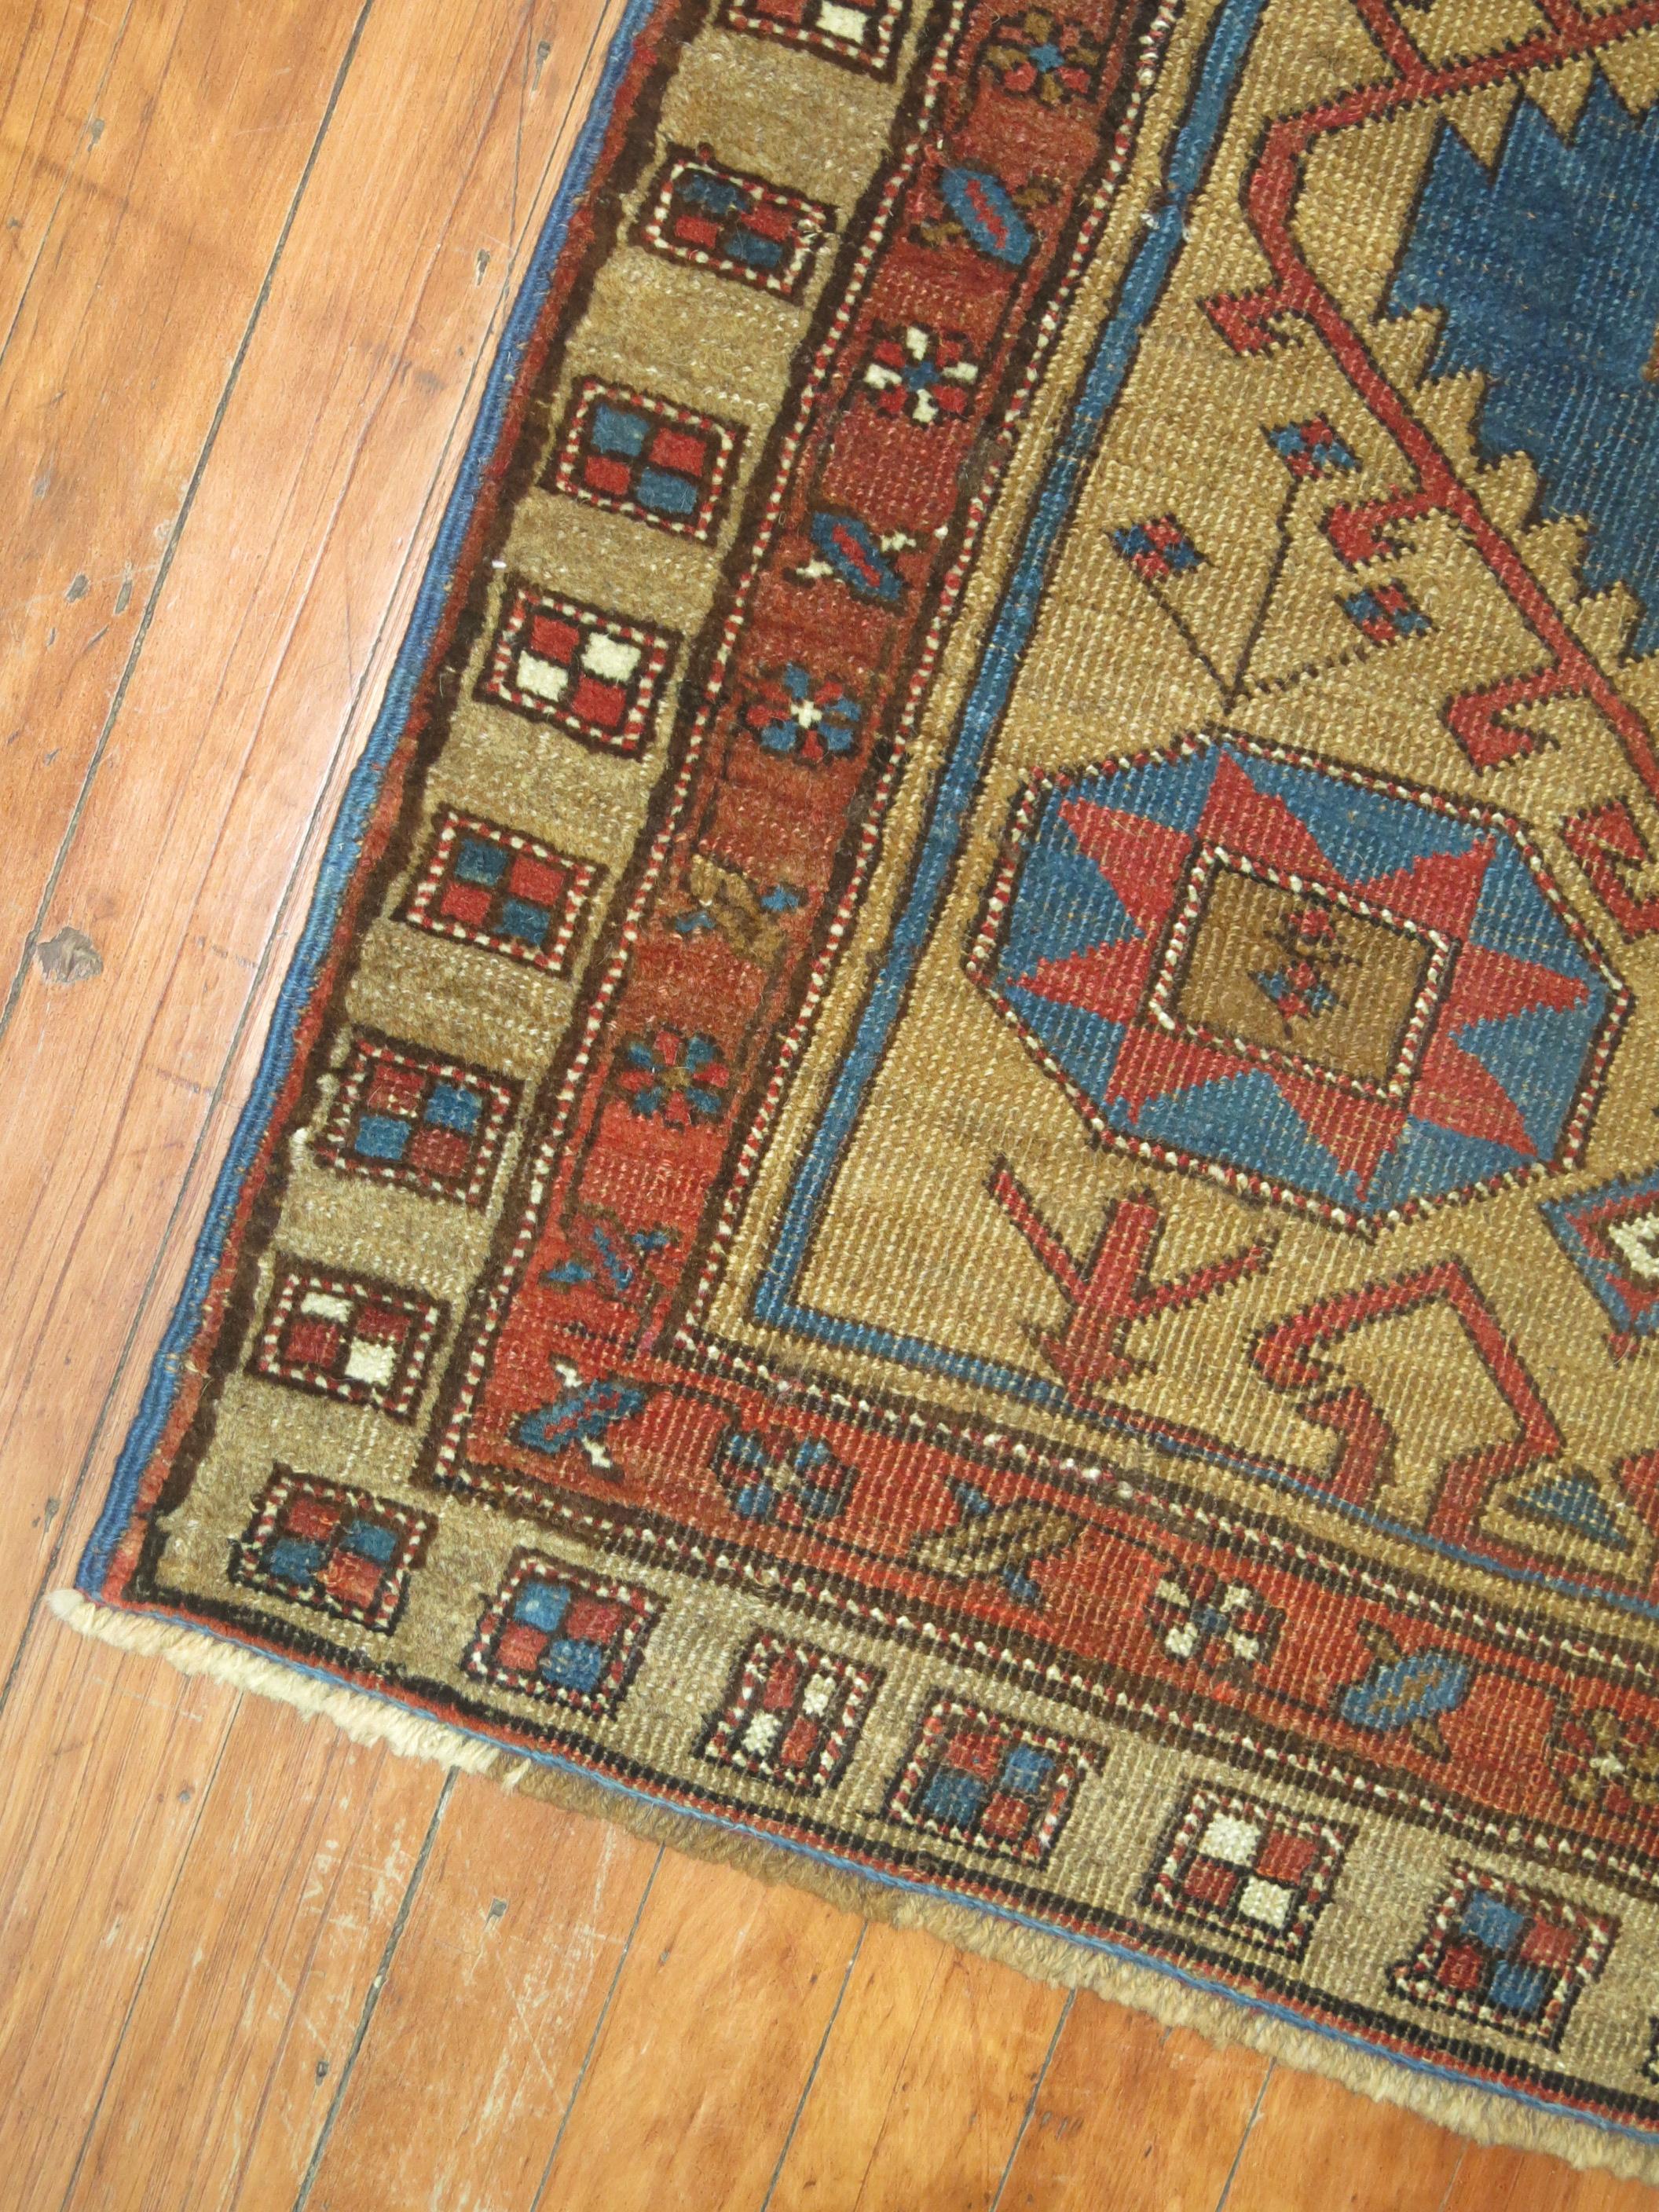 Tribal Narrow Persian Bakshaish Runner In Excellent Condition For Sale In New York, NY